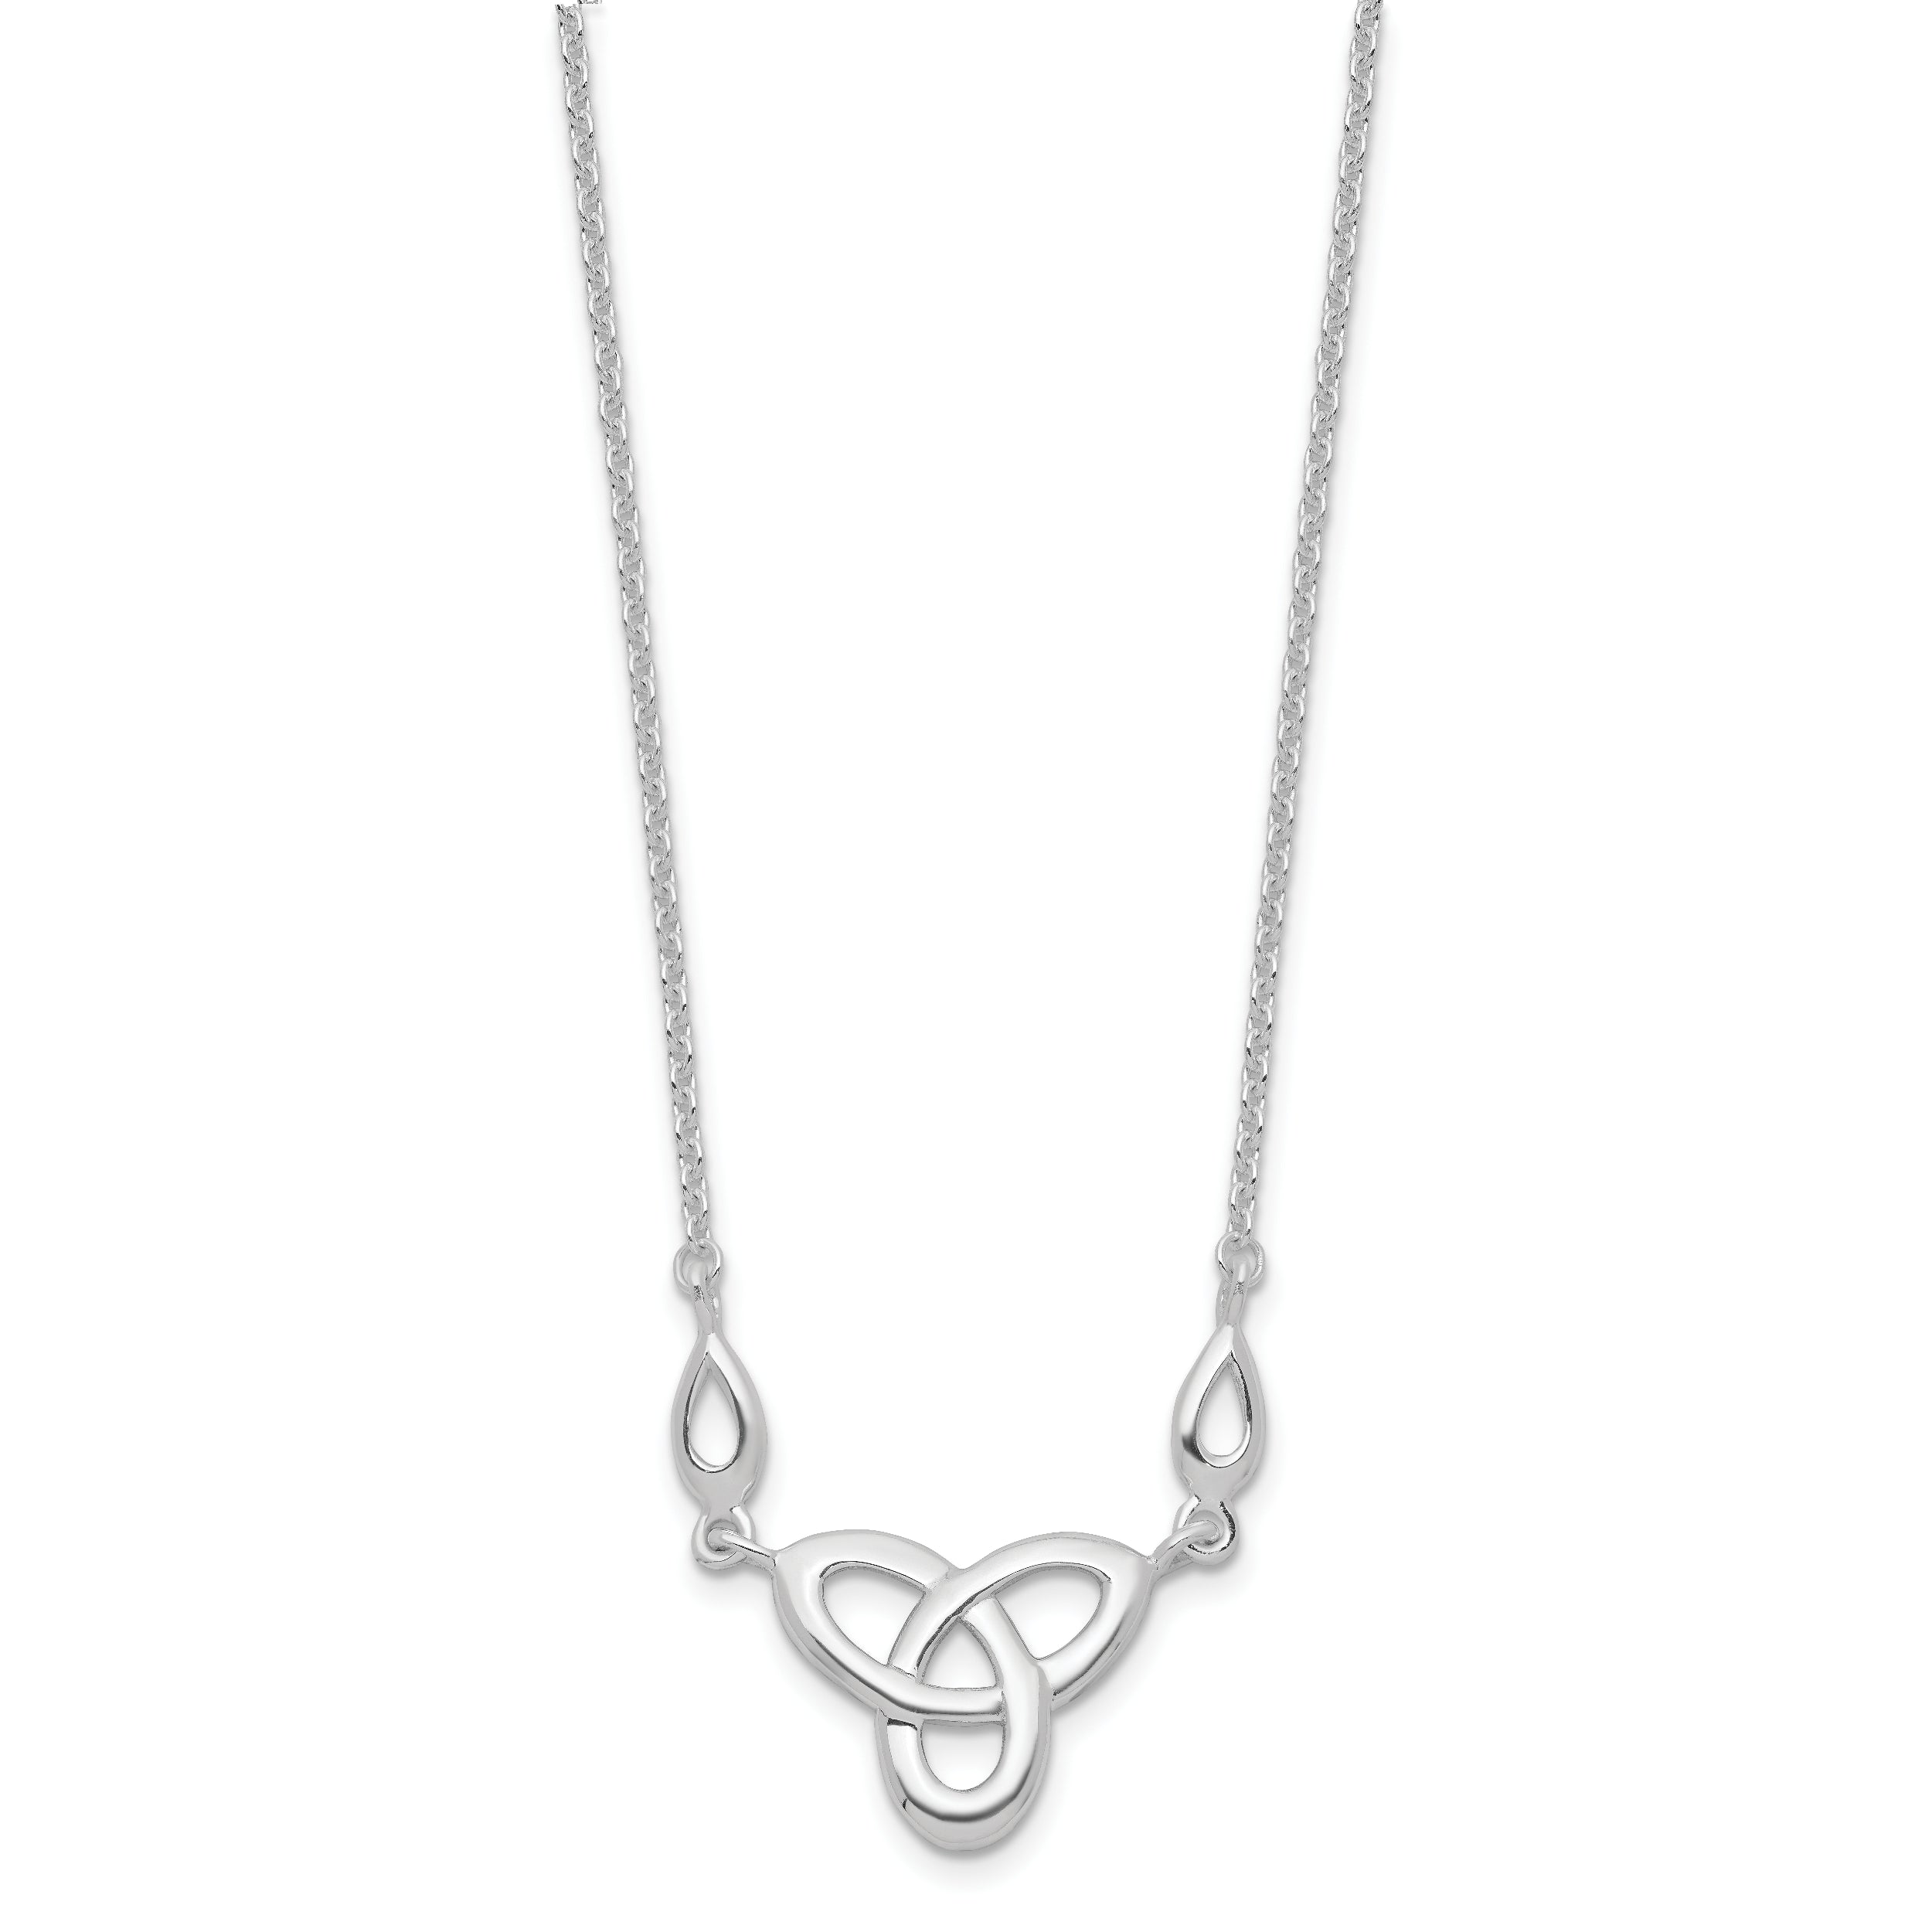 Sterling Silver Rhodium-plated Polished Celtic Knot 16 inch Necklace with 1.5 inch extension